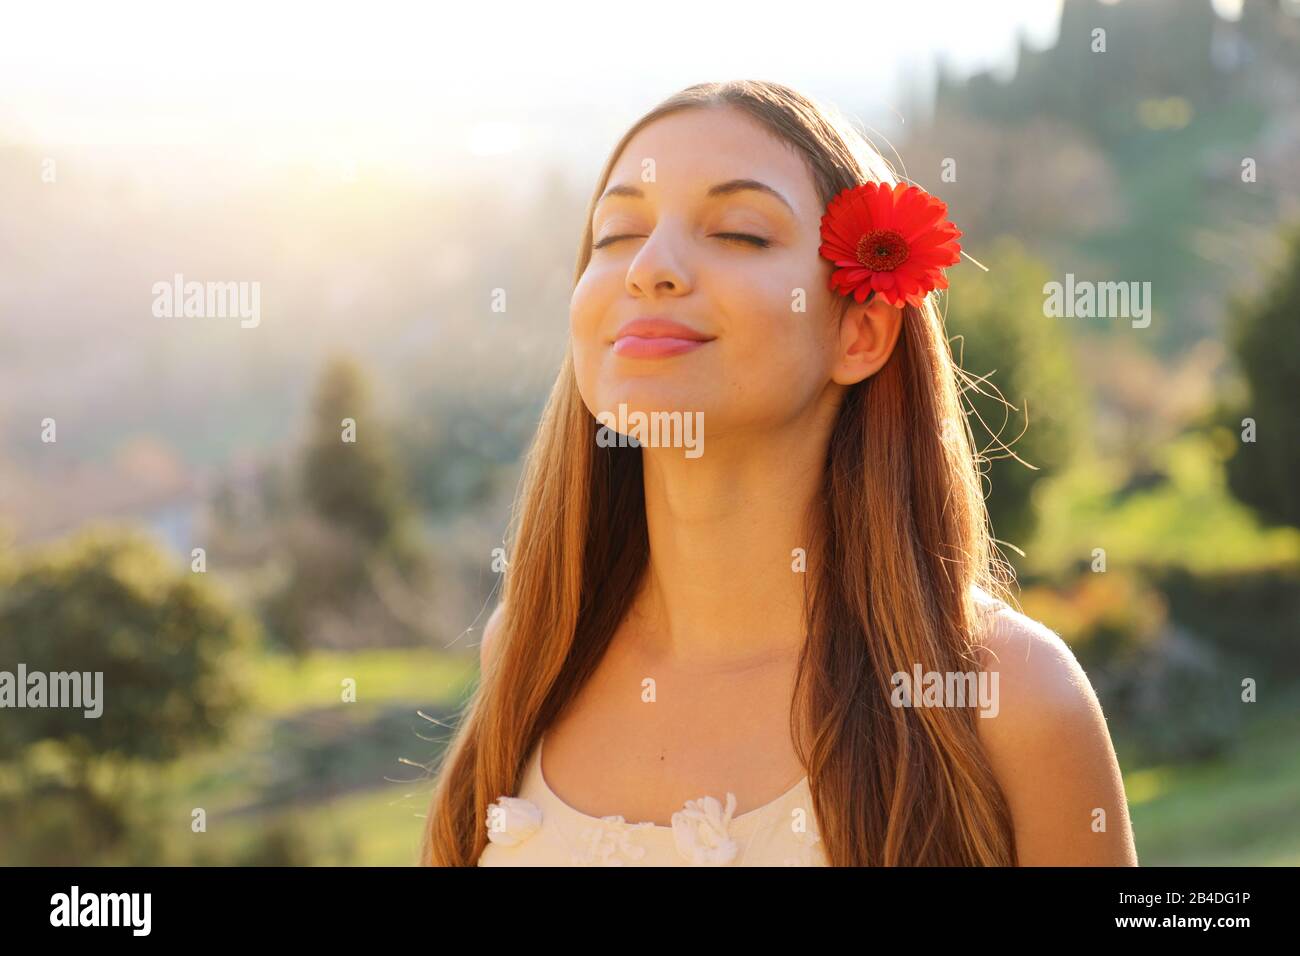 Attractive spring girl smiling with closed eyes taking deep breath. Positive human emotion face expression feeling life perception success peace mind Stock Photo